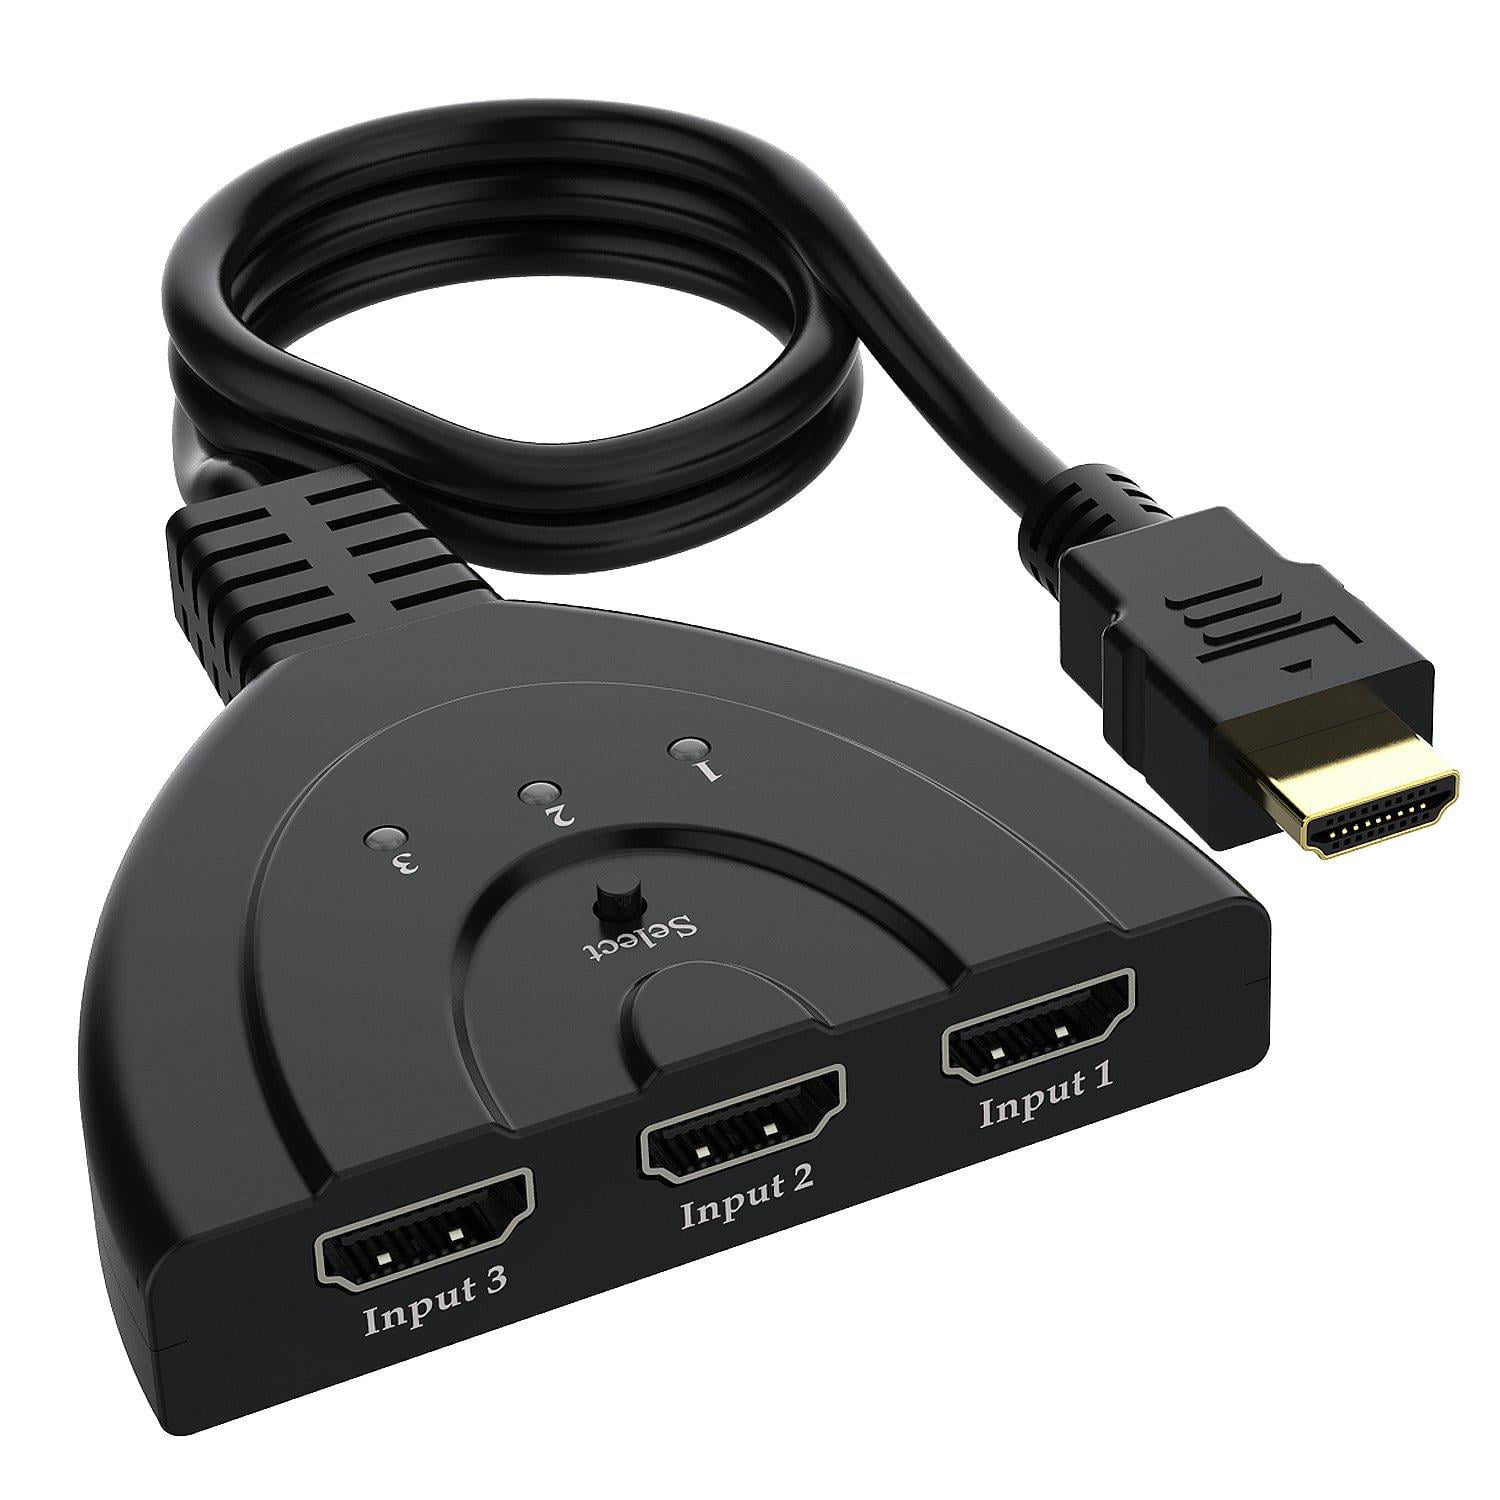 4K HDMI Splitter Switch 3-Port 2ft 3 In out Splitter Support 4K,3D,1080P For HDMI TV, PS3, Xbox One,etc - Walmart.com